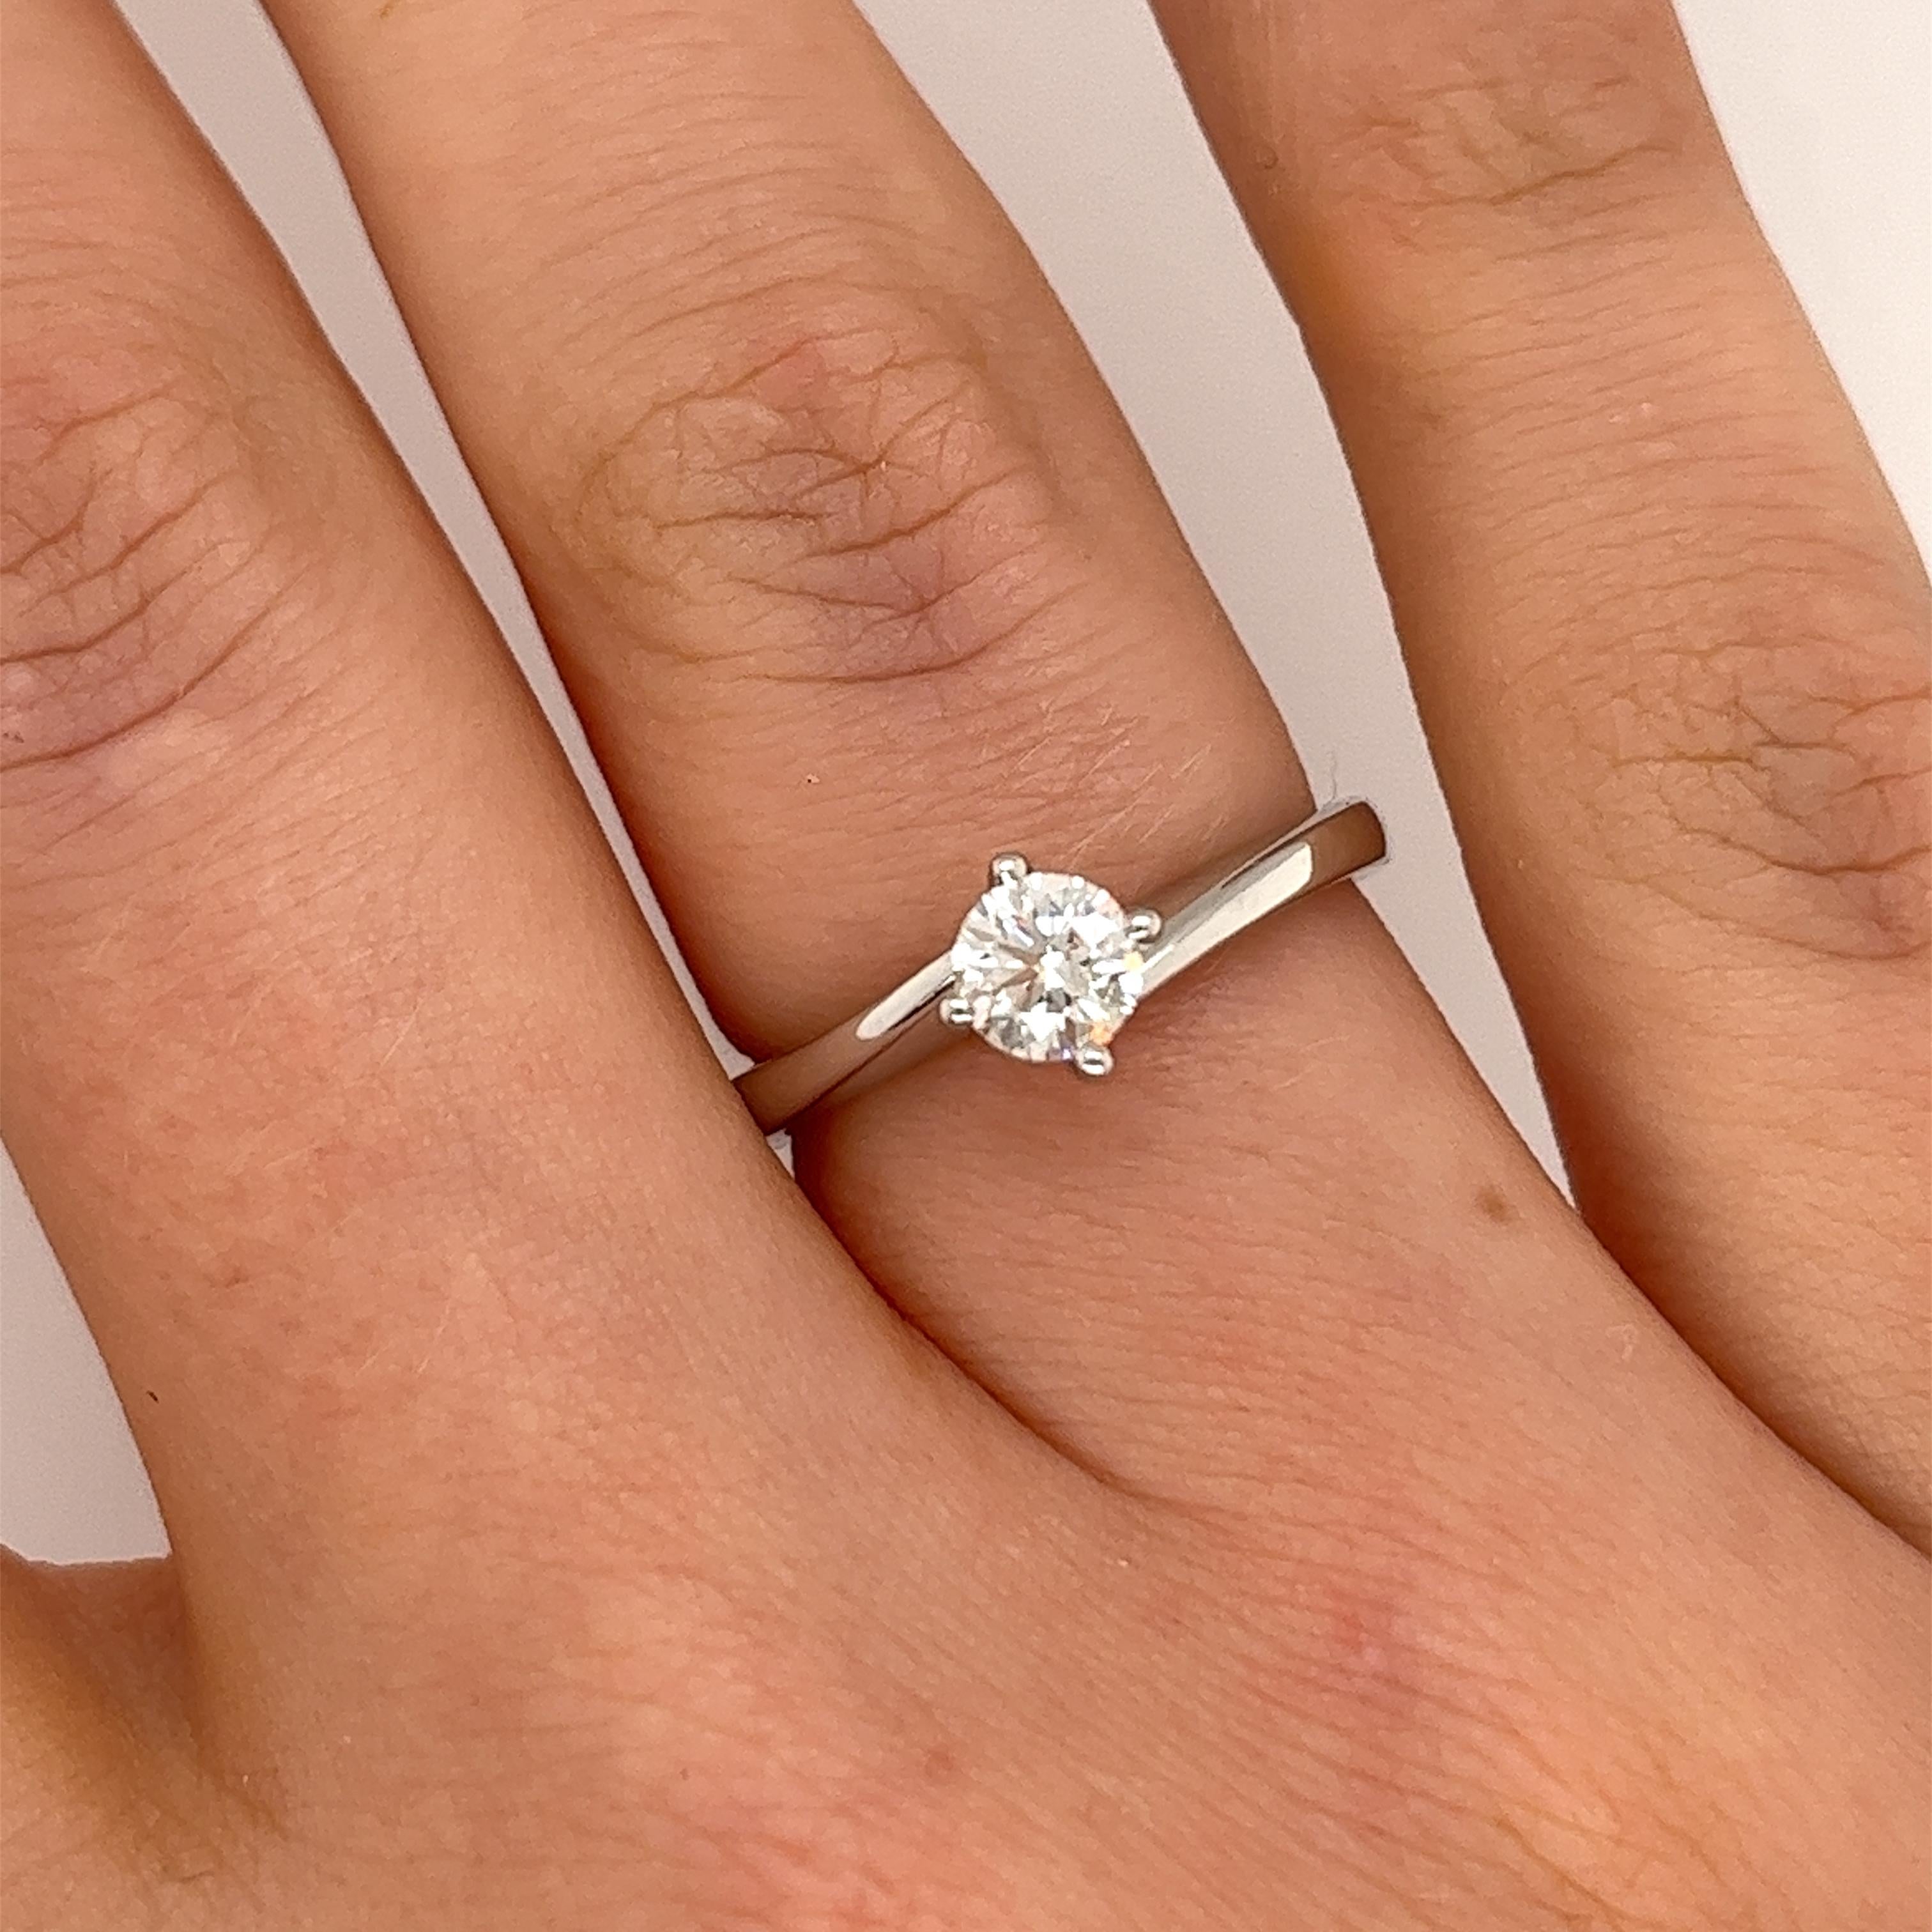 This preloved classic platinum solitaire crossover 
round brilliant cut diamond ring is set with 0.41ct F colour VS1 clarity.
A timeless symbol of everlasting love.
Total Diamond Weight: 0.41ct
Diamond Colour: F
Diamond Clarity: VS1
Width of Band: